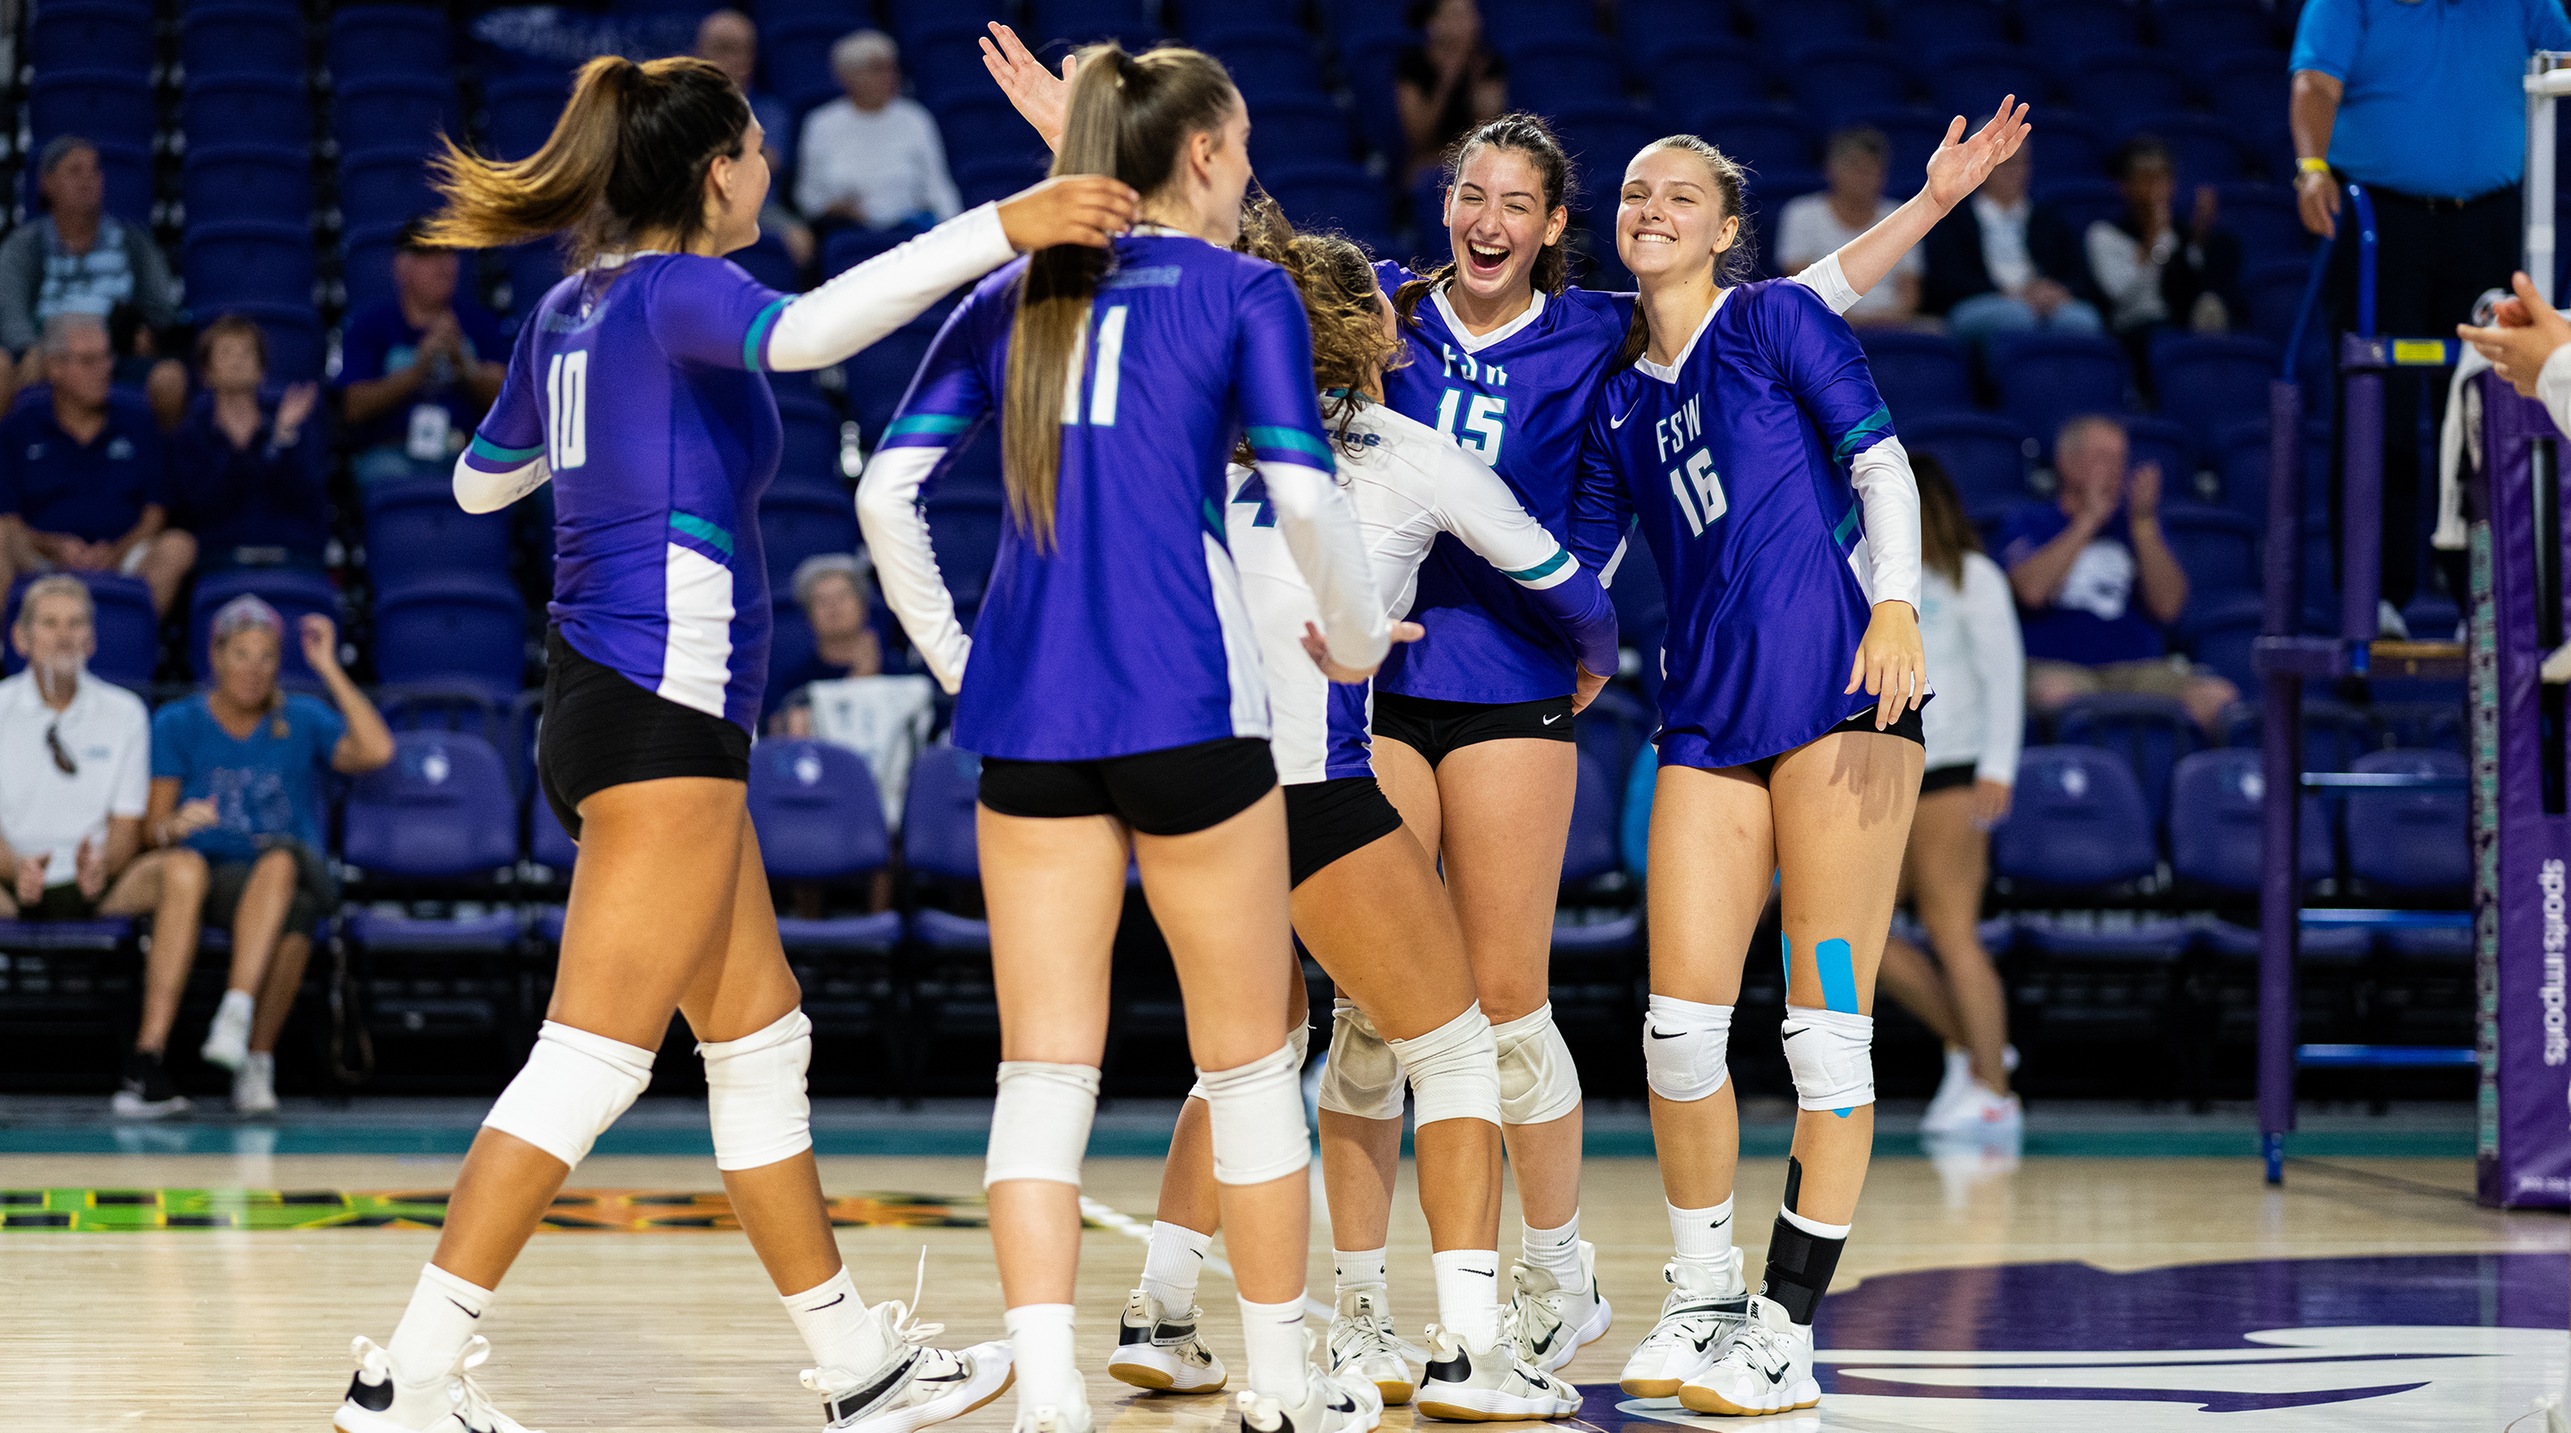 The Bucs celebrate a point in their win over Polk State Friday
(Photo by Brad Young/BradYoungPhoto.com)